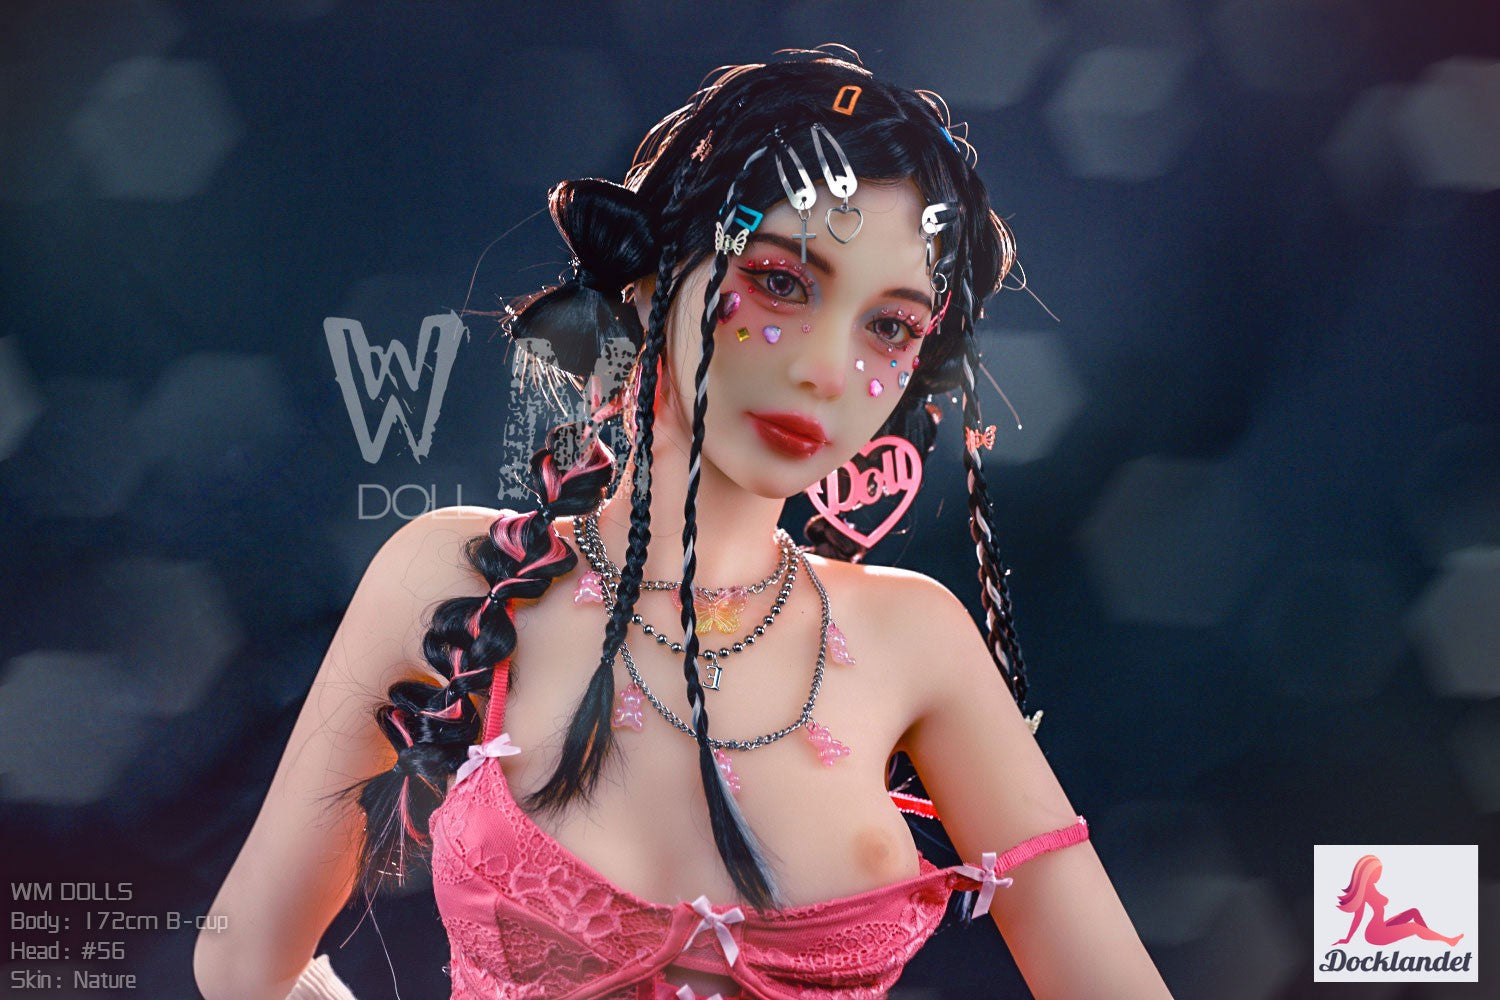 WM-Doll 172 cm B-Cup with Head #56. Sex doll With Nature Skin Color and Special Make Up.